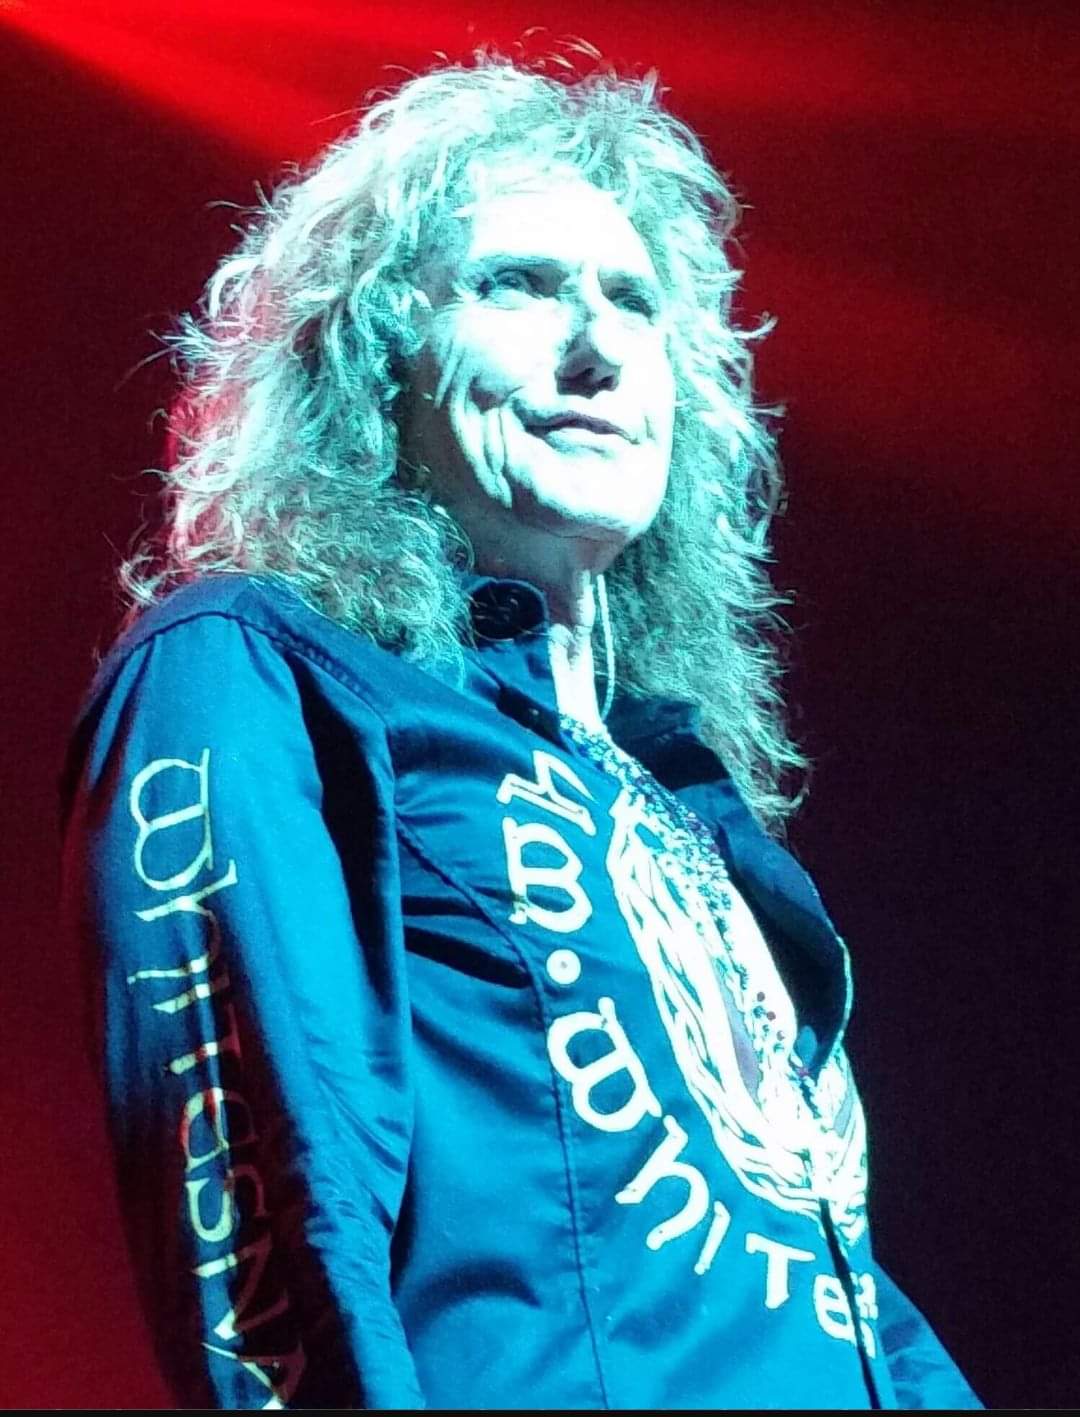 A Very Happy 69th. Birthday Wish Today To David Coverdale!!!
CHEERS!!!
All The Best!!!       